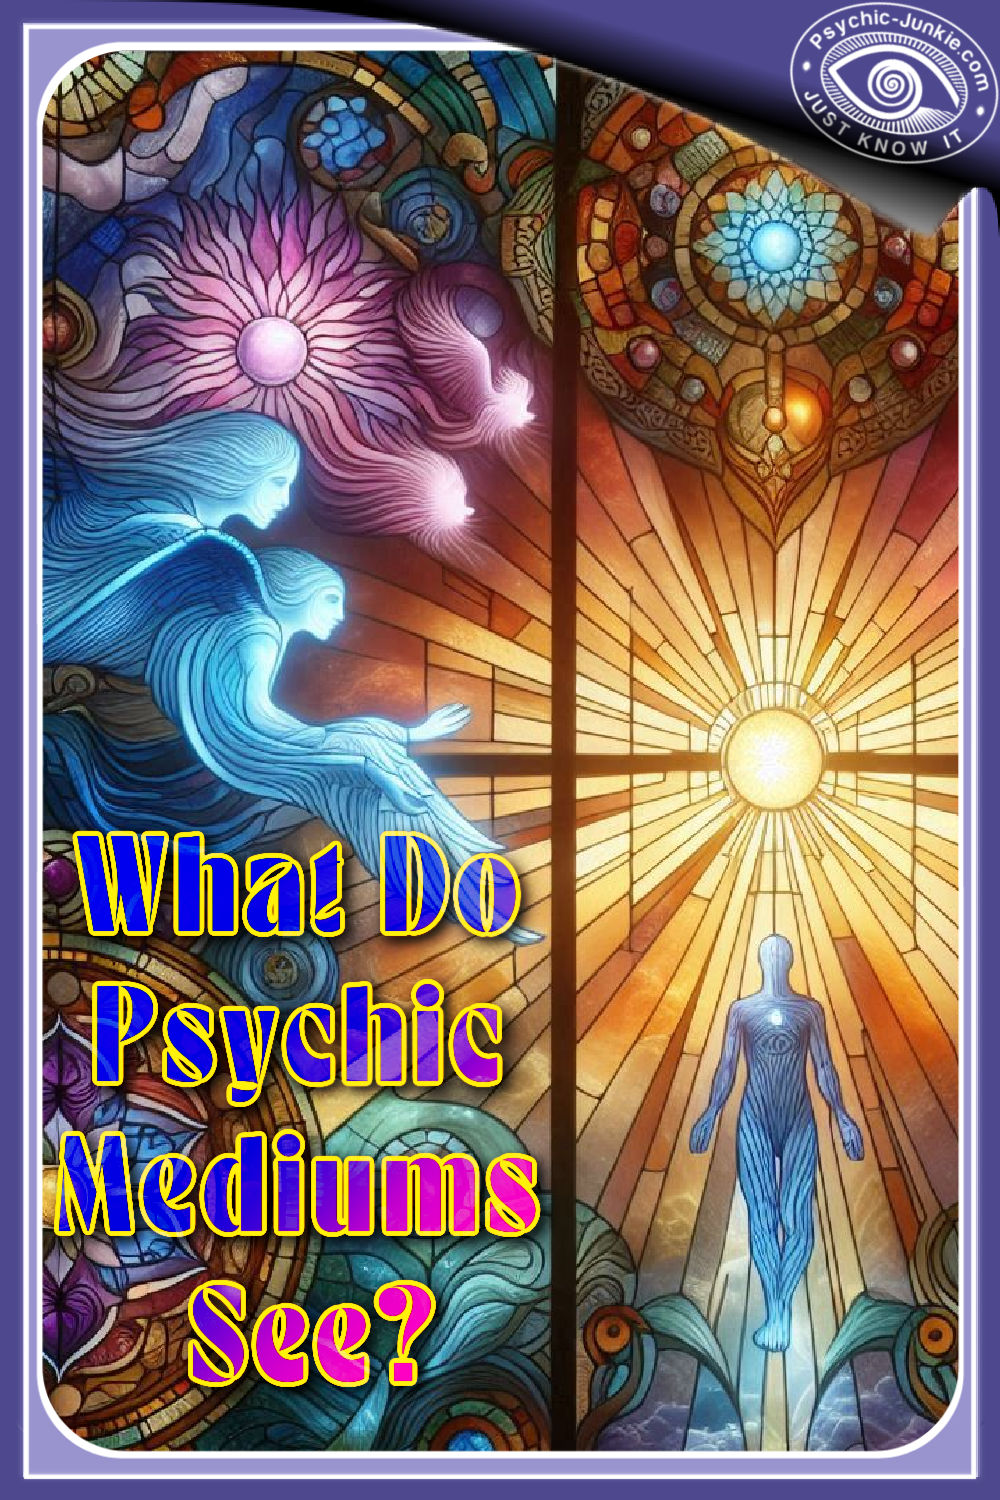 What Do Psychic Mediums See?